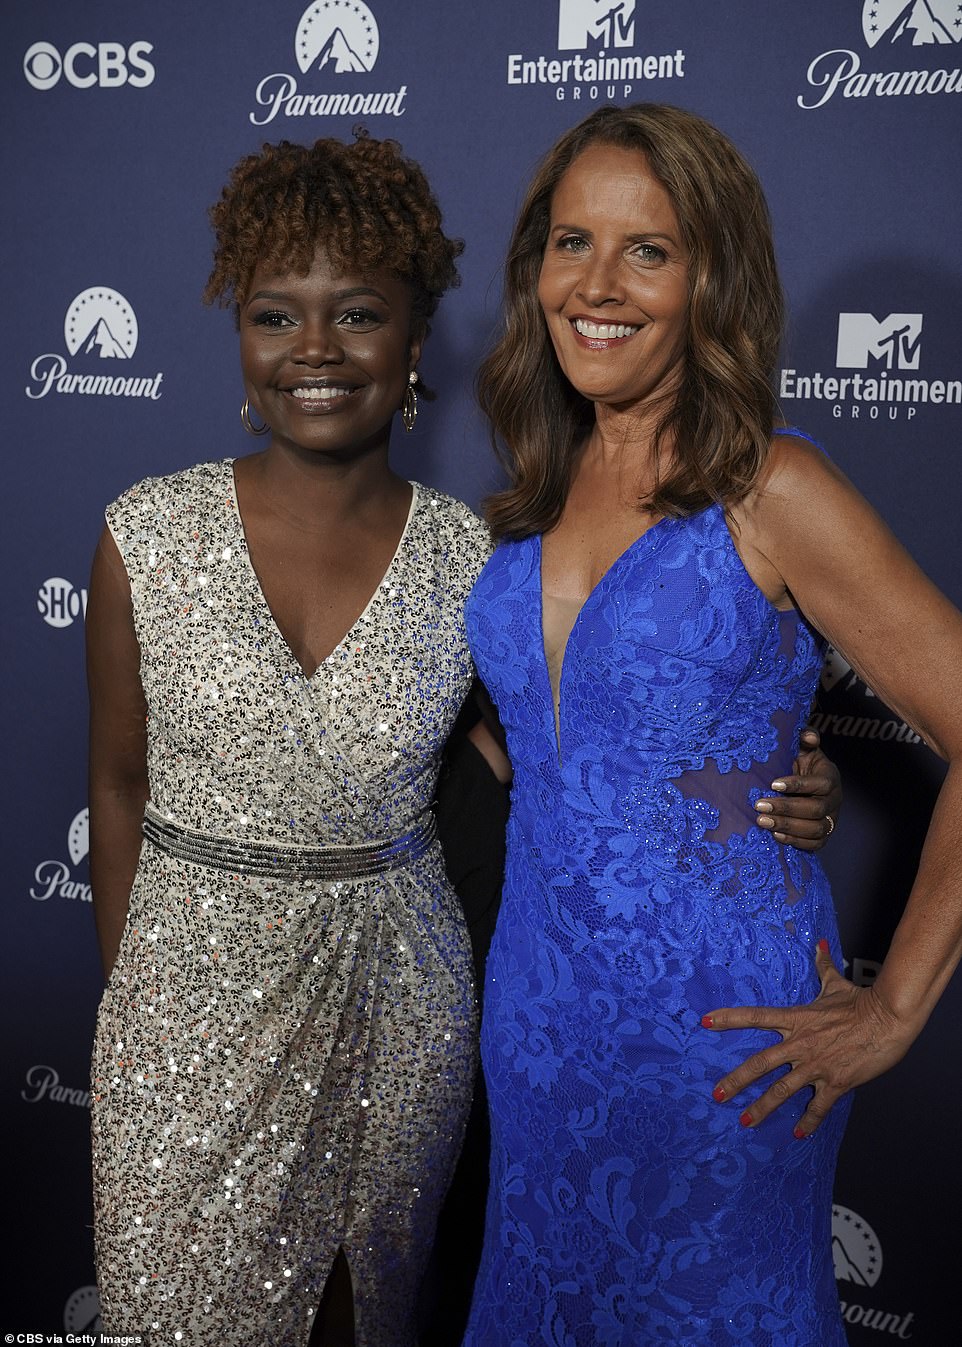 Karine Jean-Pierre, 44, and her partner Suzanne Malveaux, CNN National Correspondent, 55, pictured Saturday night at the White House Correspondents' Dinner.